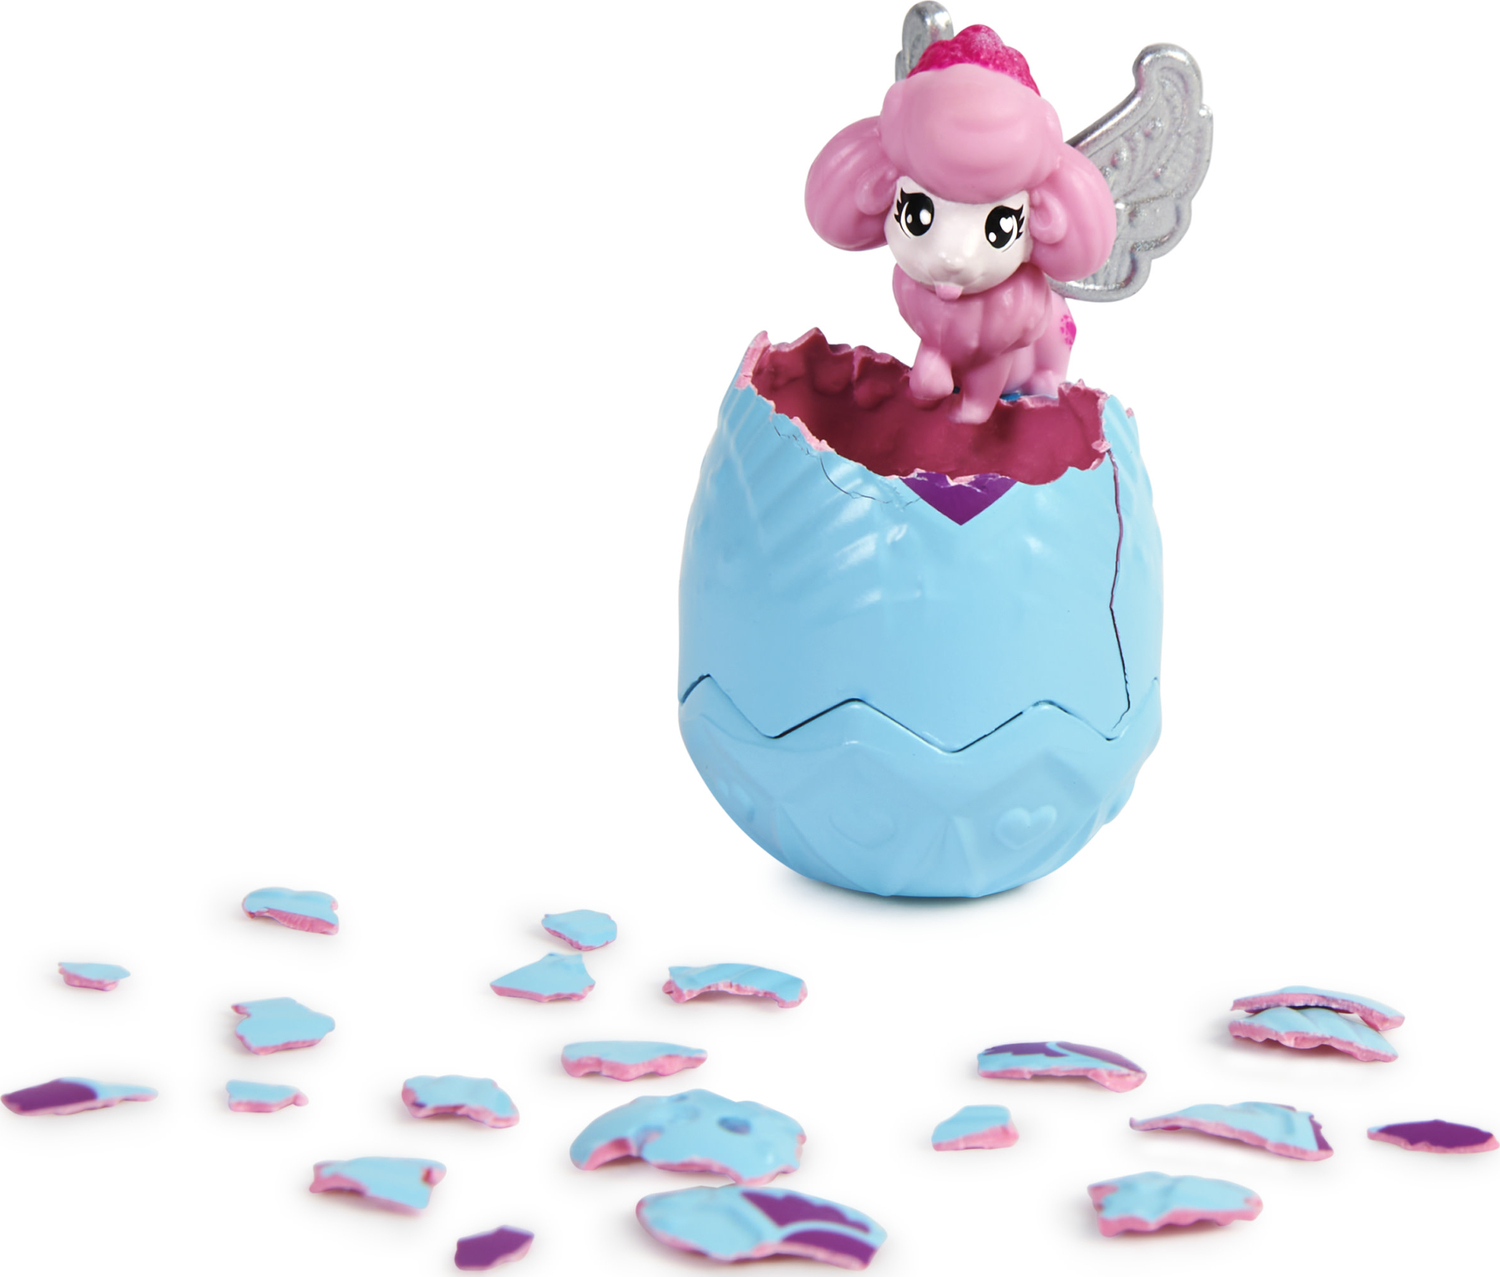 Spin Master's Hatchimals Are Back With Mini Colleggtibles - Mommy Nearest